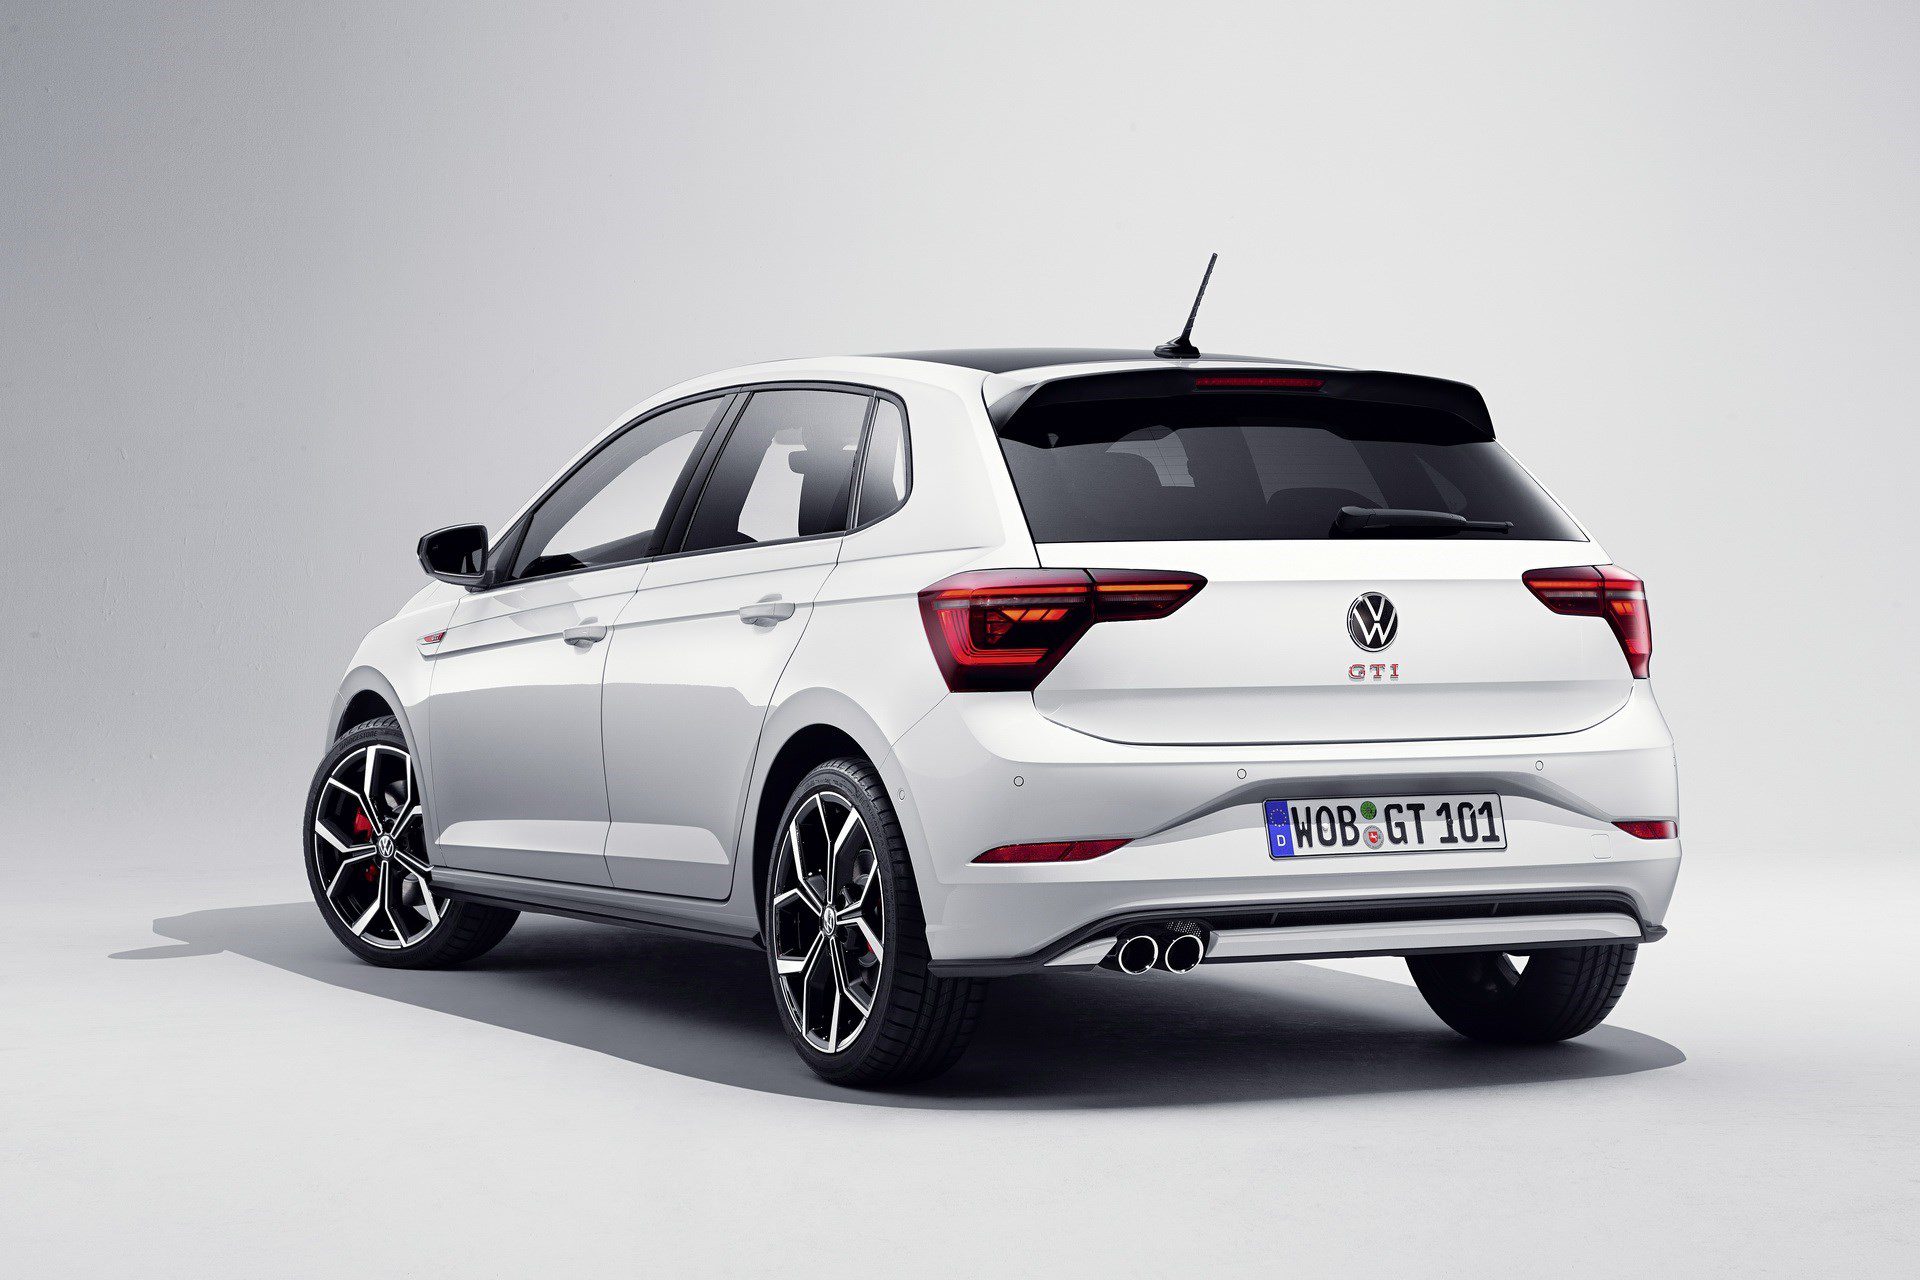 The rear of the VW Polo GTI